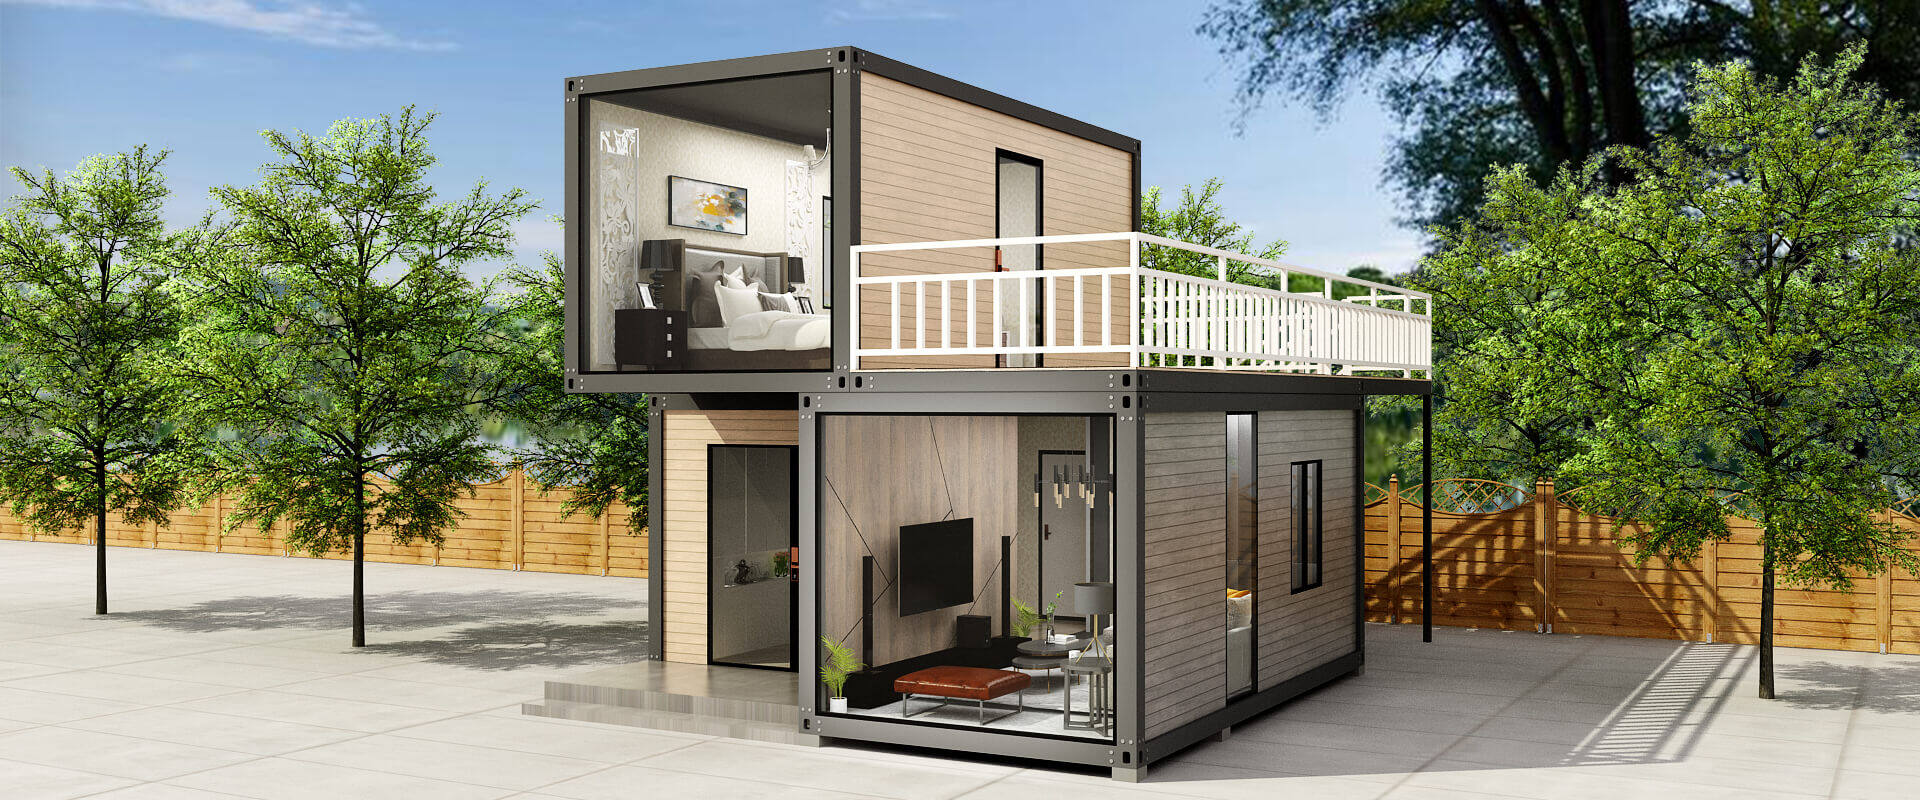 What other uses are there for container houses?